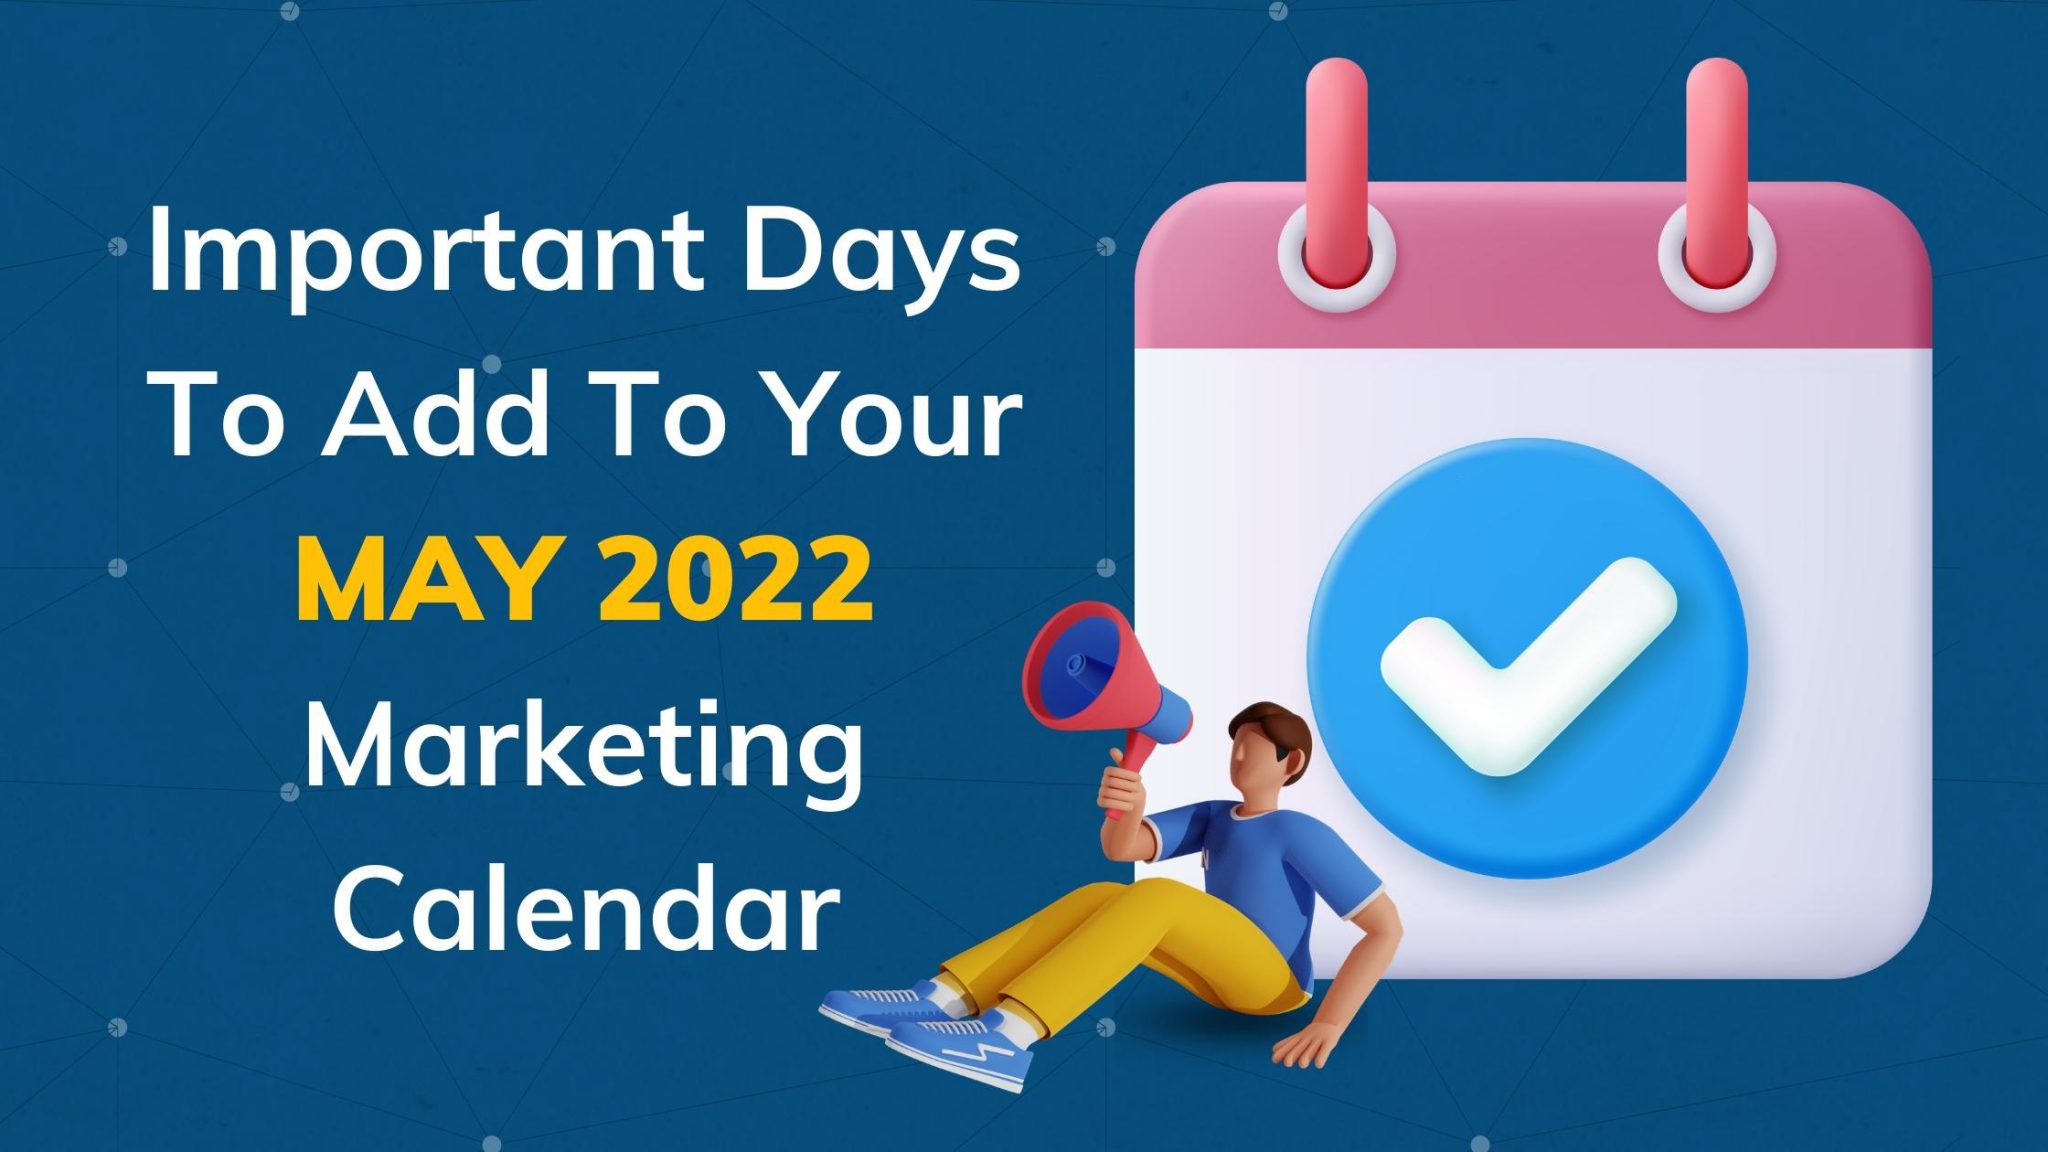 enhance-marketing-strategies-with-a-content-calendar-for-may-2022